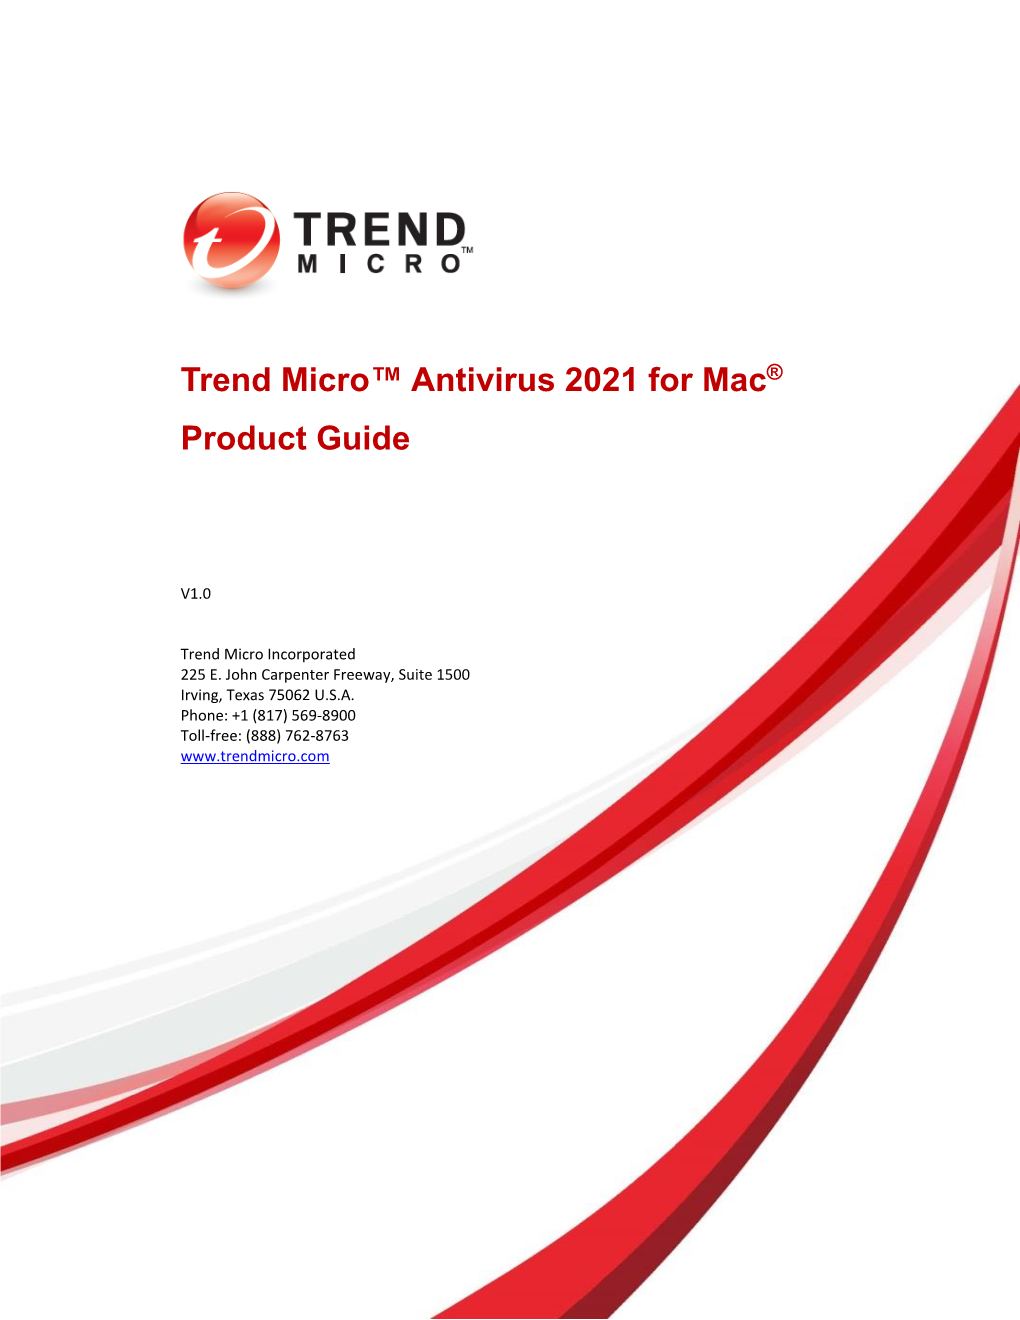 PG - TM Antivirus 2021 for Mac - Product Guide V1.0 Document Release Date: October 21, 2020 Team: Consumer Technical Product Marketing